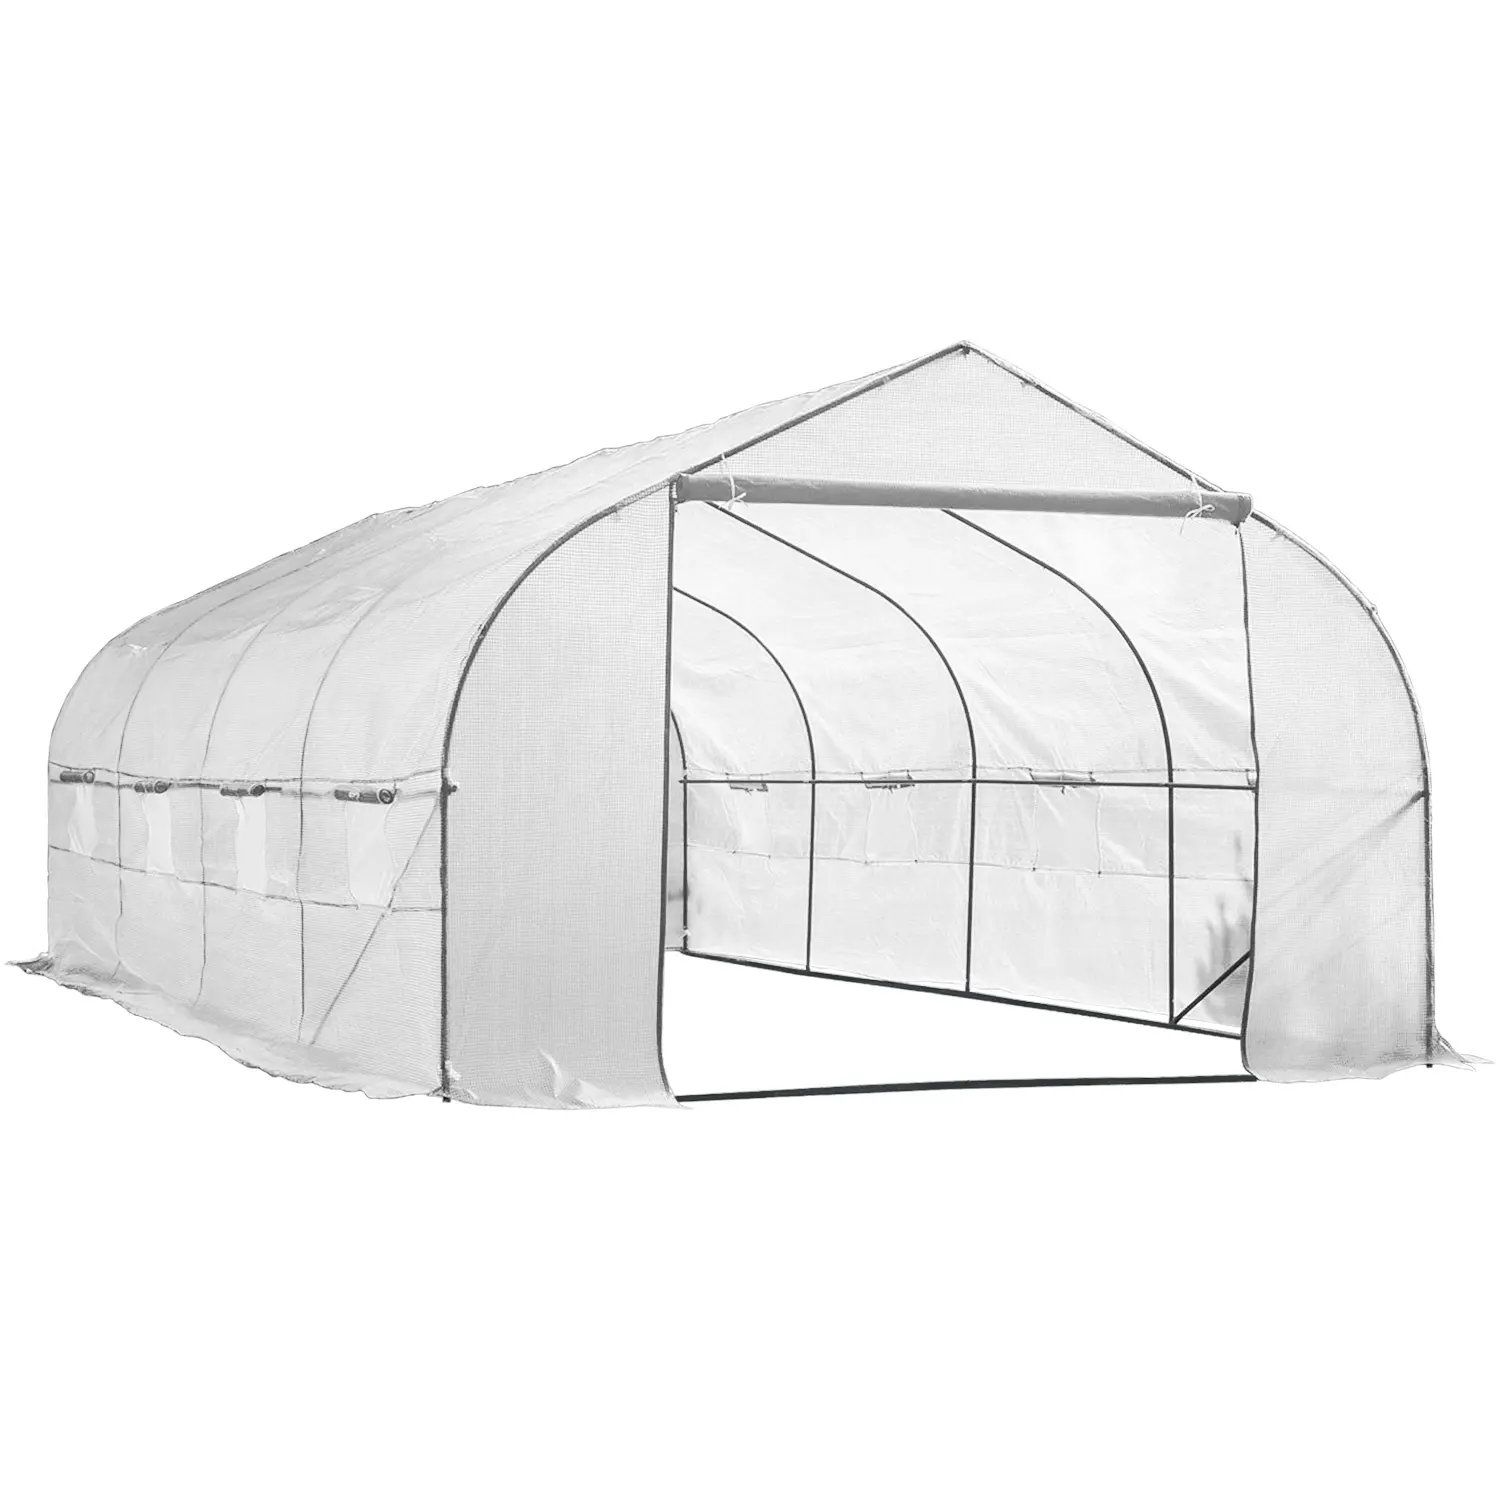 Ldpe Material Agriculture Low Cost Uv Treated Agricultural Plastic Sheet Greenhouse Cover Polyethylene With Hydroponic Growing